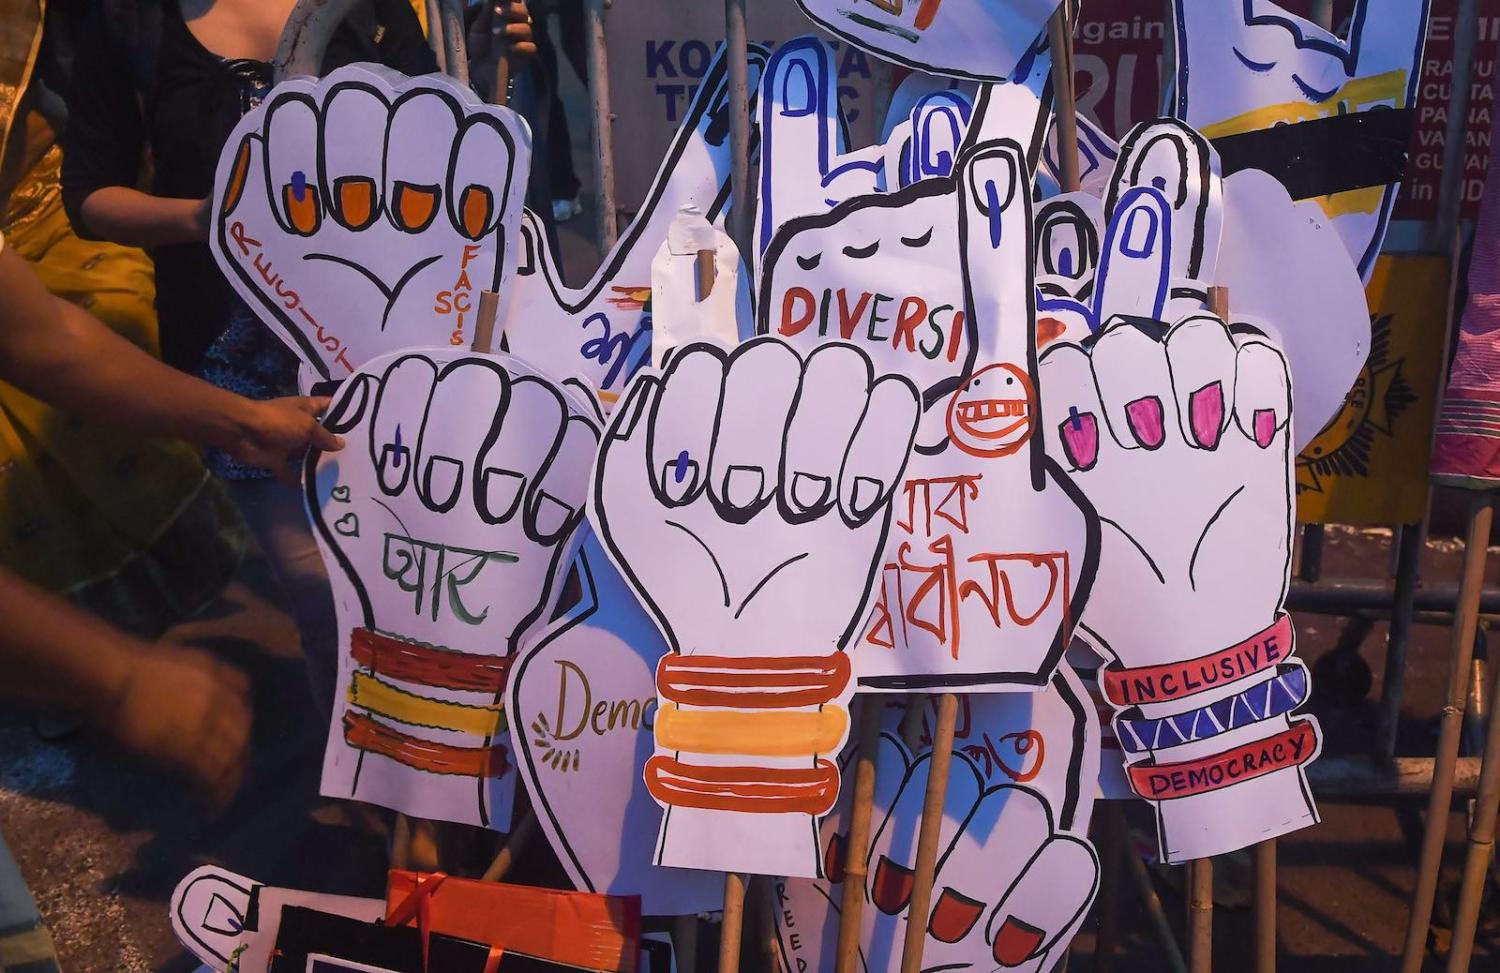 Women and LGBTQI activists rally to create awareness among Indian voters (Photo: Dibyangshu Sarkar via Getty)